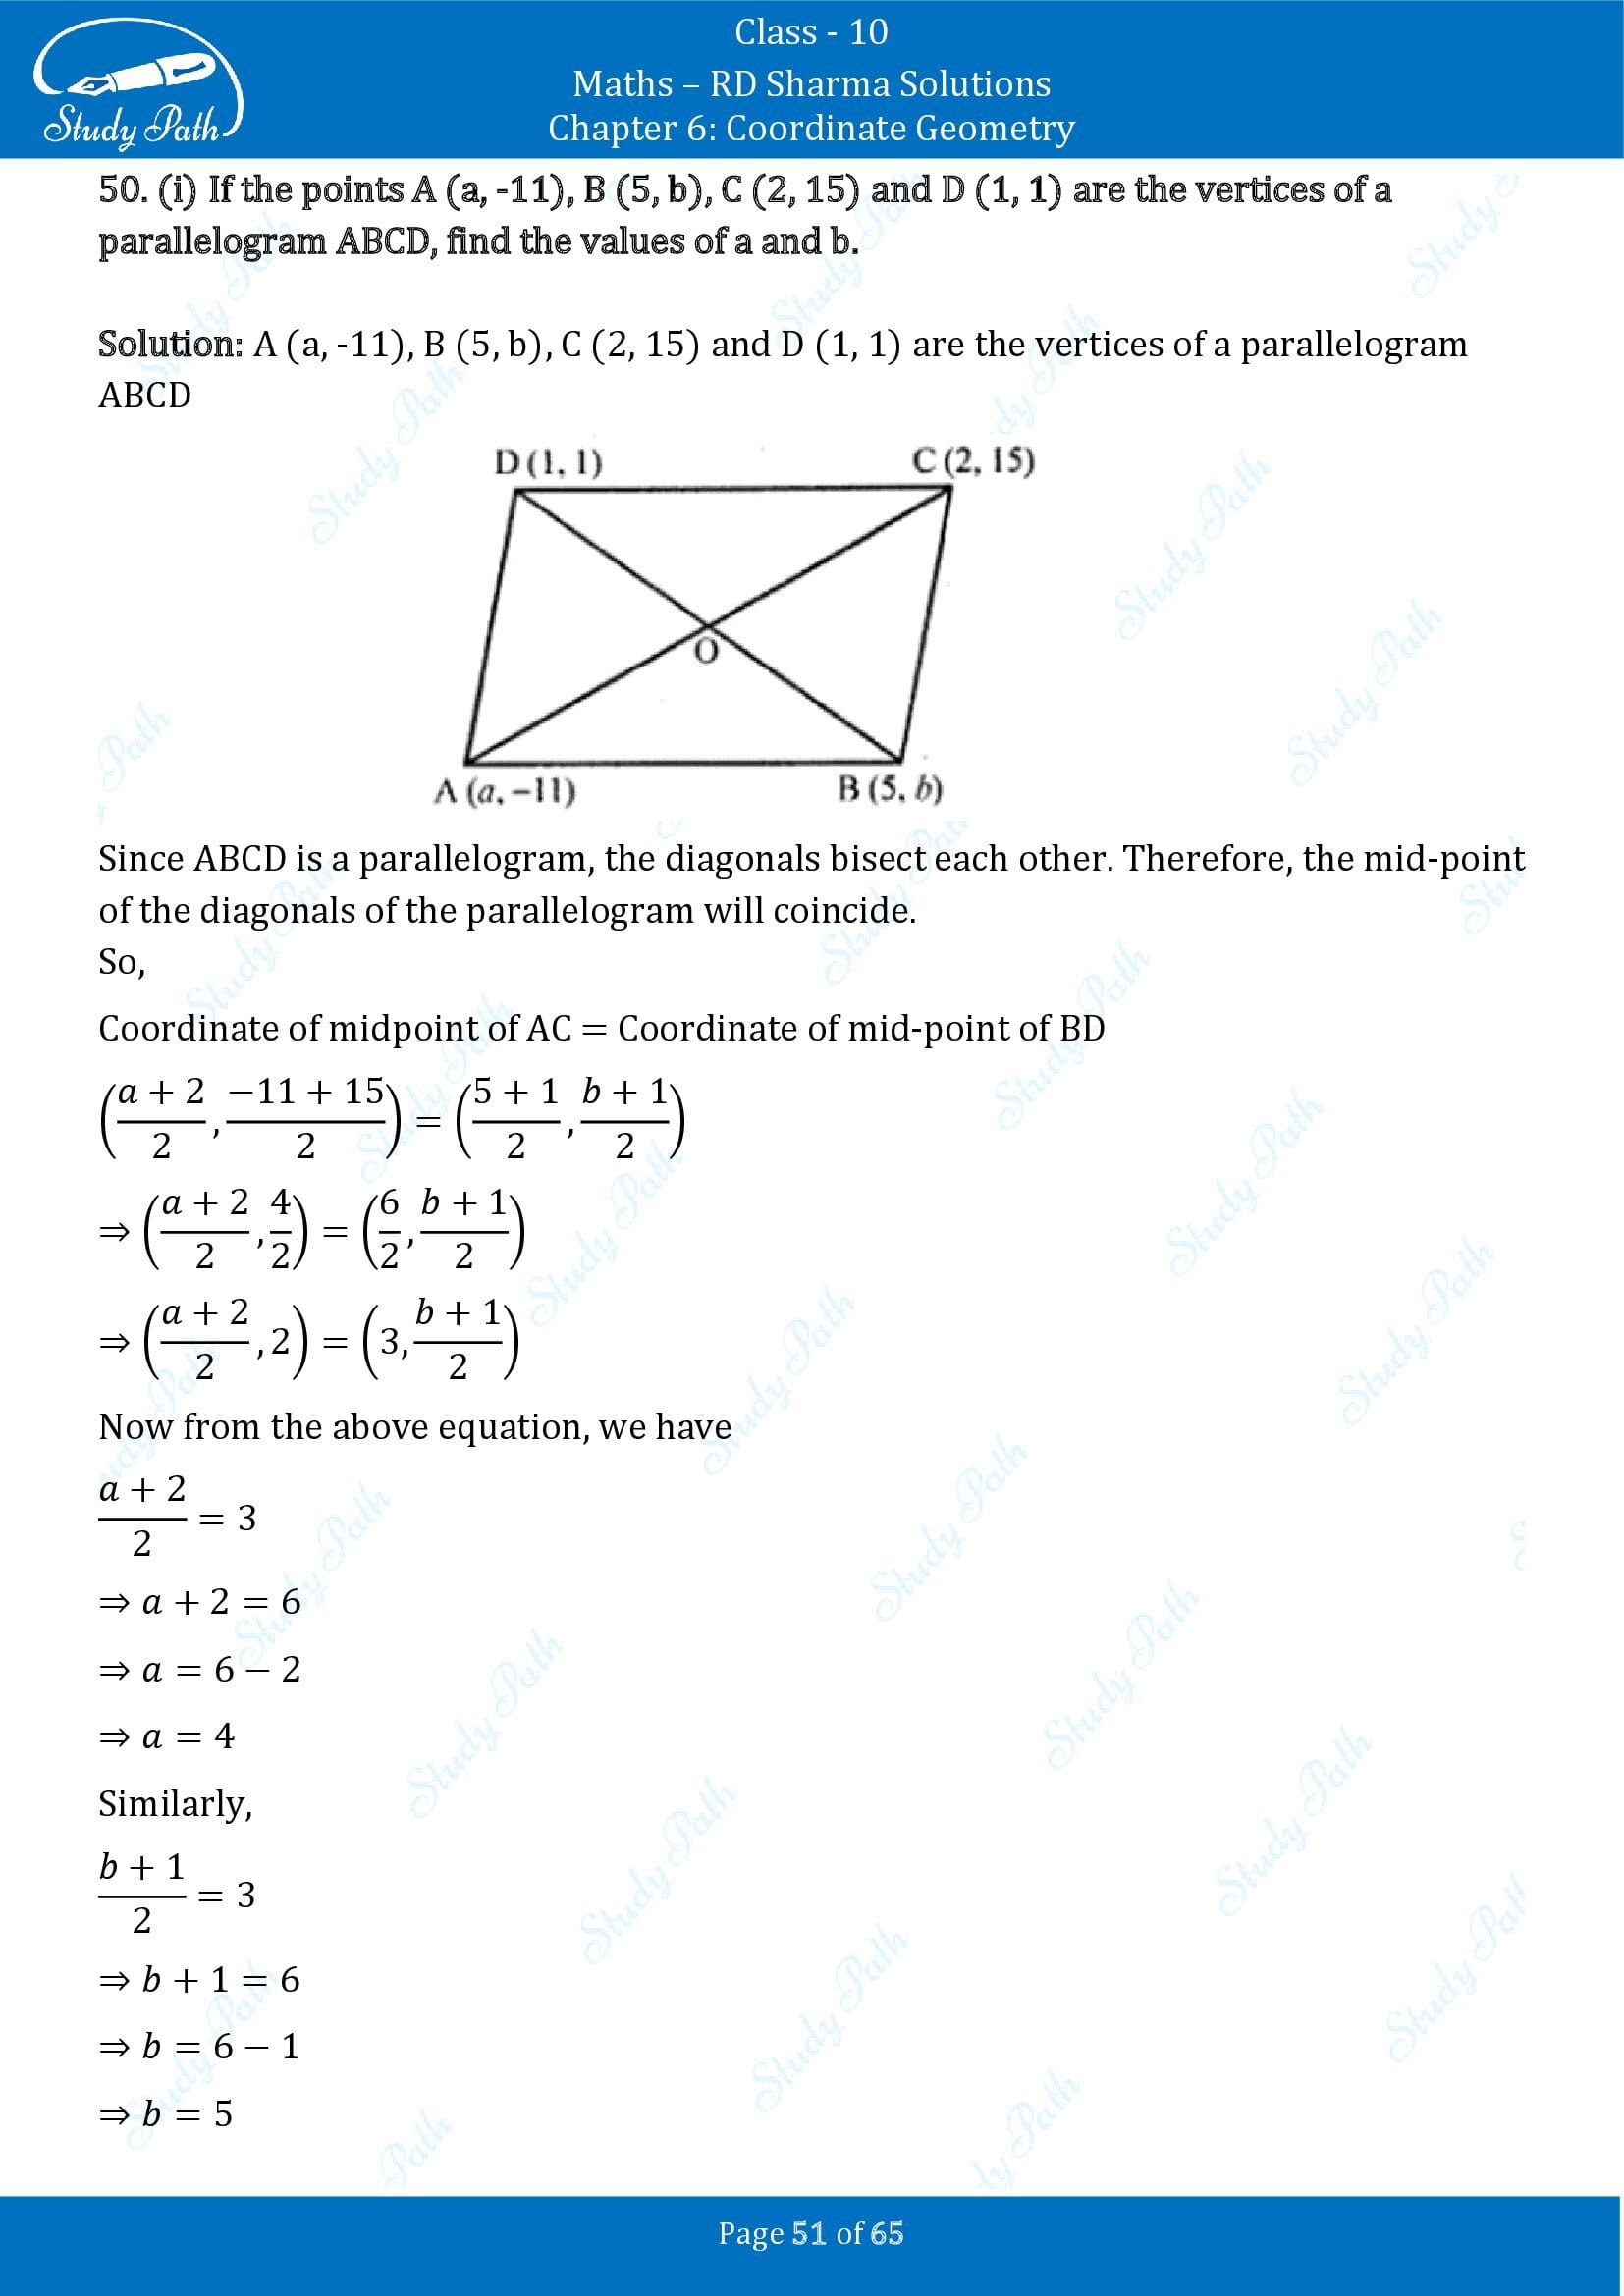 RD Sharma Solutions Class 10 Chapter 6 Coordinate Geometry Exercise 6.3 00051